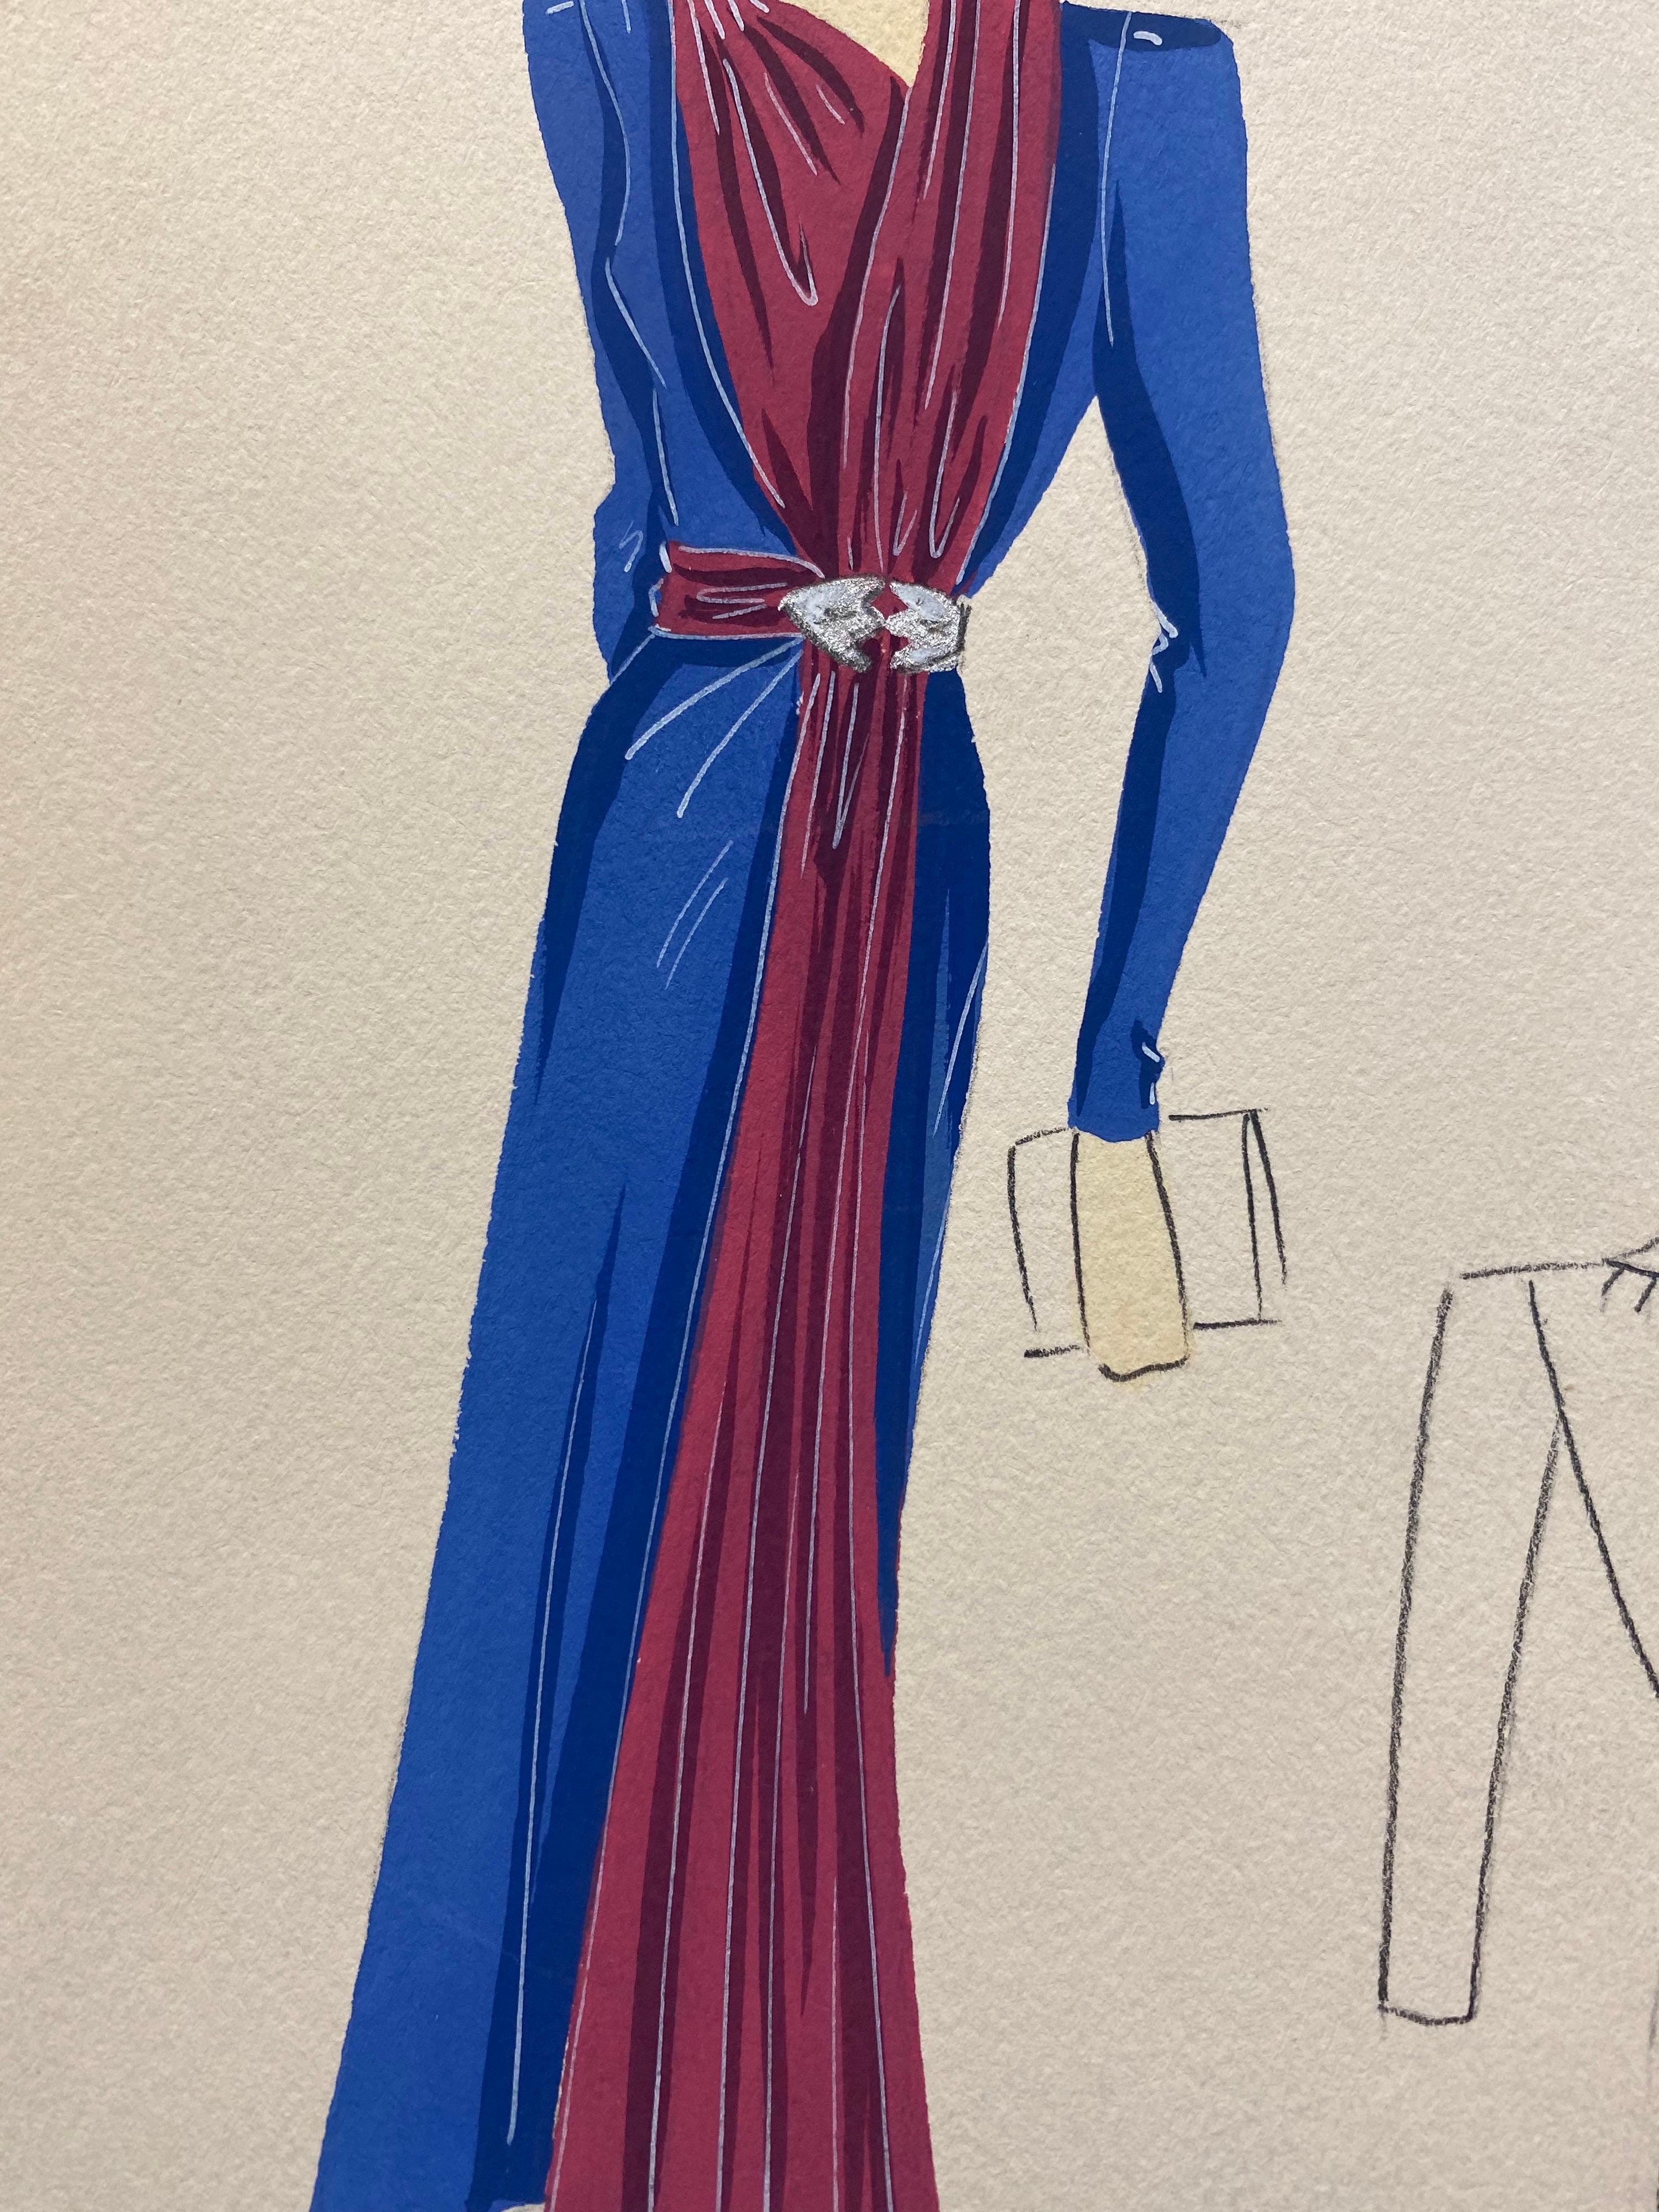 20th Century 1930's Original Parisian Fashion Illustration Watercolor Pink and Blue Dress For Sale